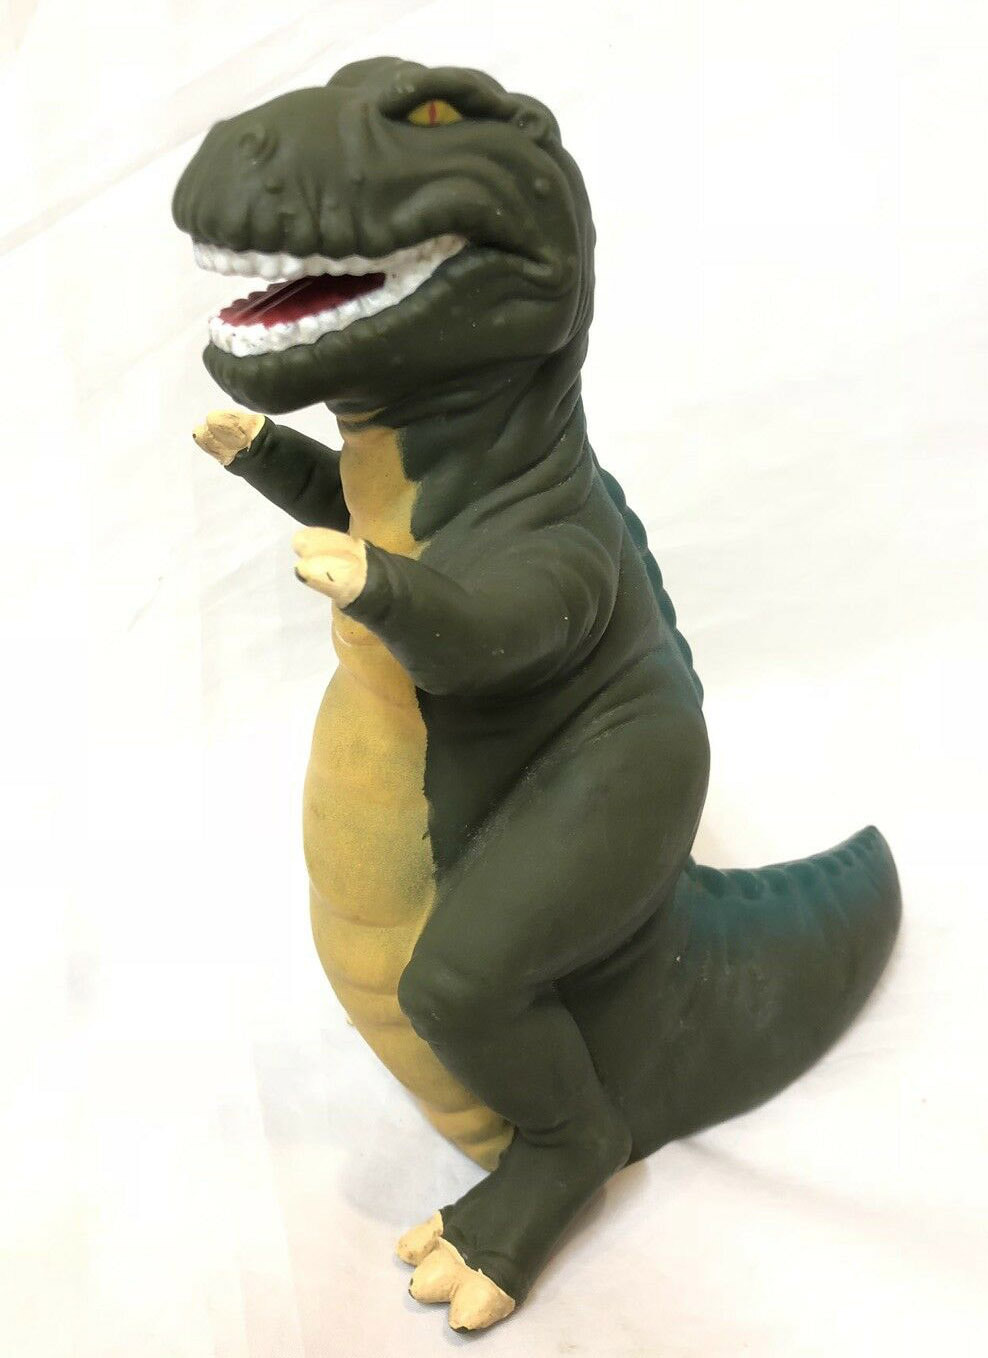 Wendy's Kids Meal Toy LAND BEFORE TIME T Rex Green Dinosaur SHARPTOOTH 